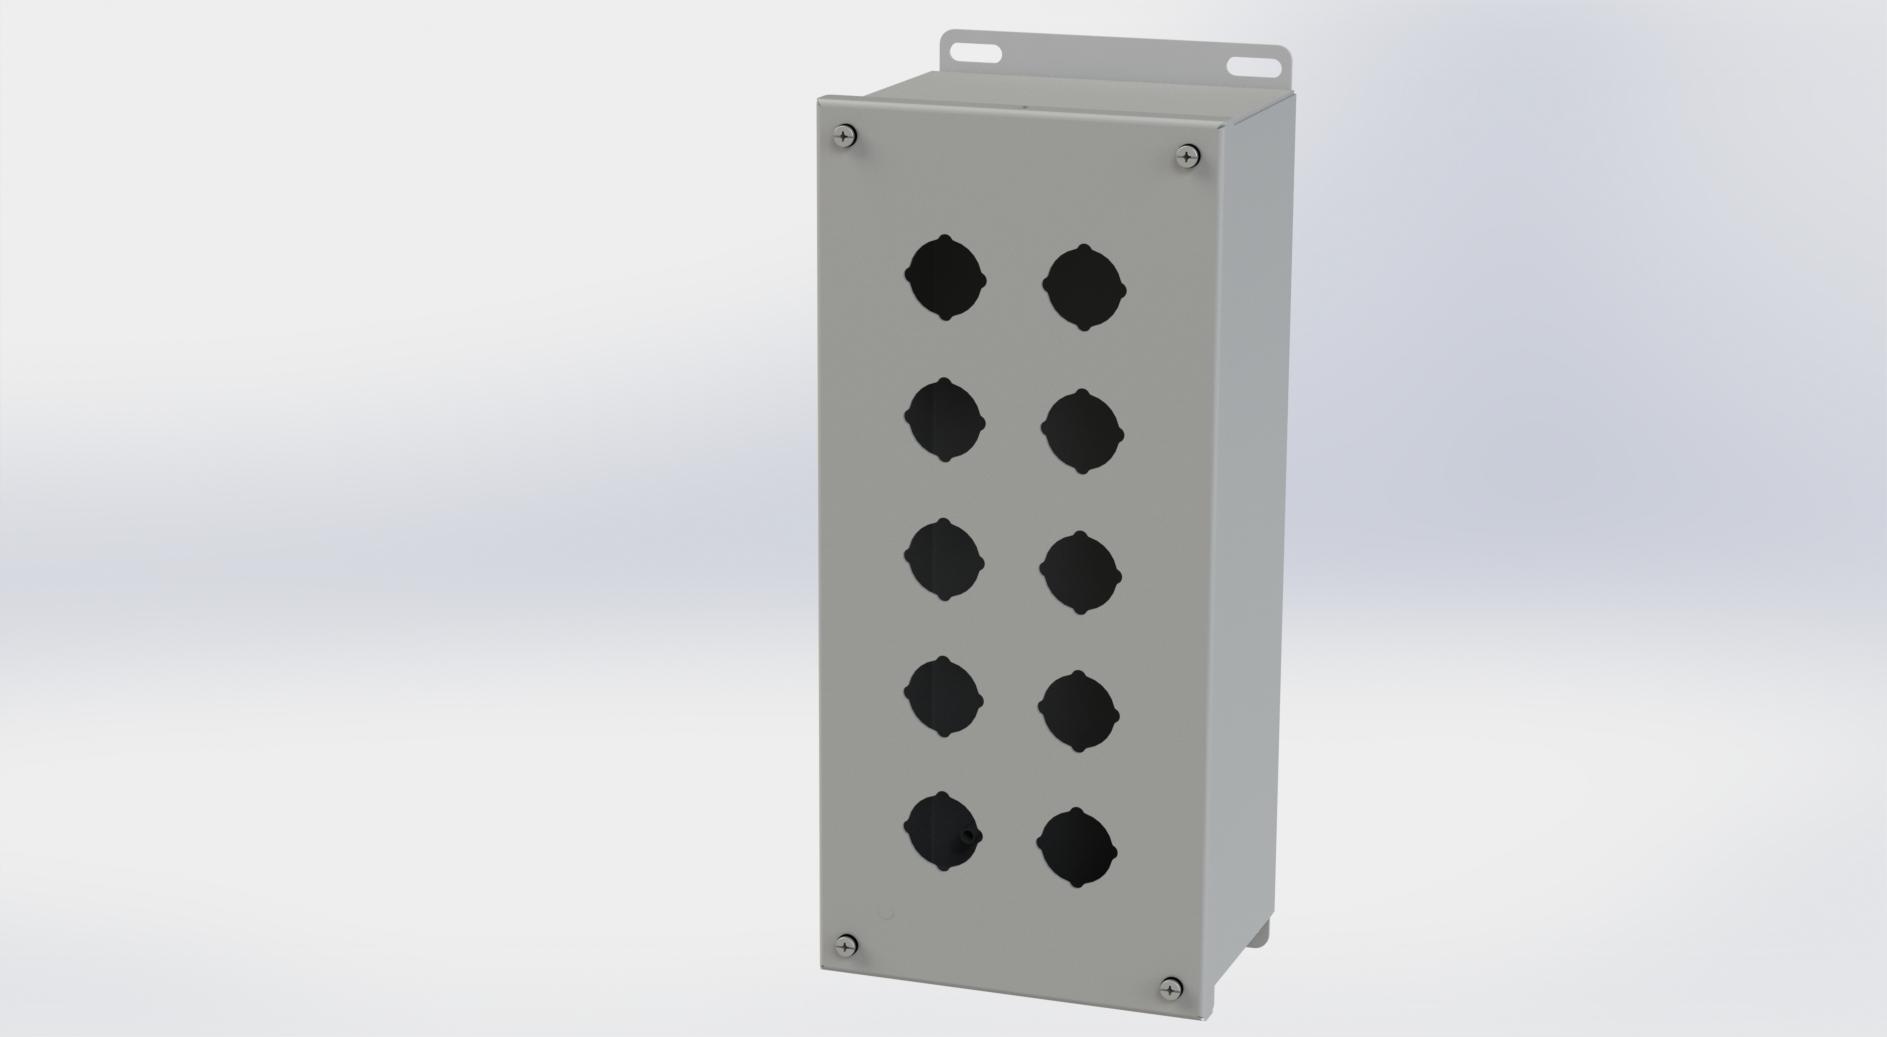 Saginaw Control SCE-10PBX PBX Enclosure, Height:14.00", Width:6.25", Depth:4.75", ANSI-61 gray powder coating inside and out.